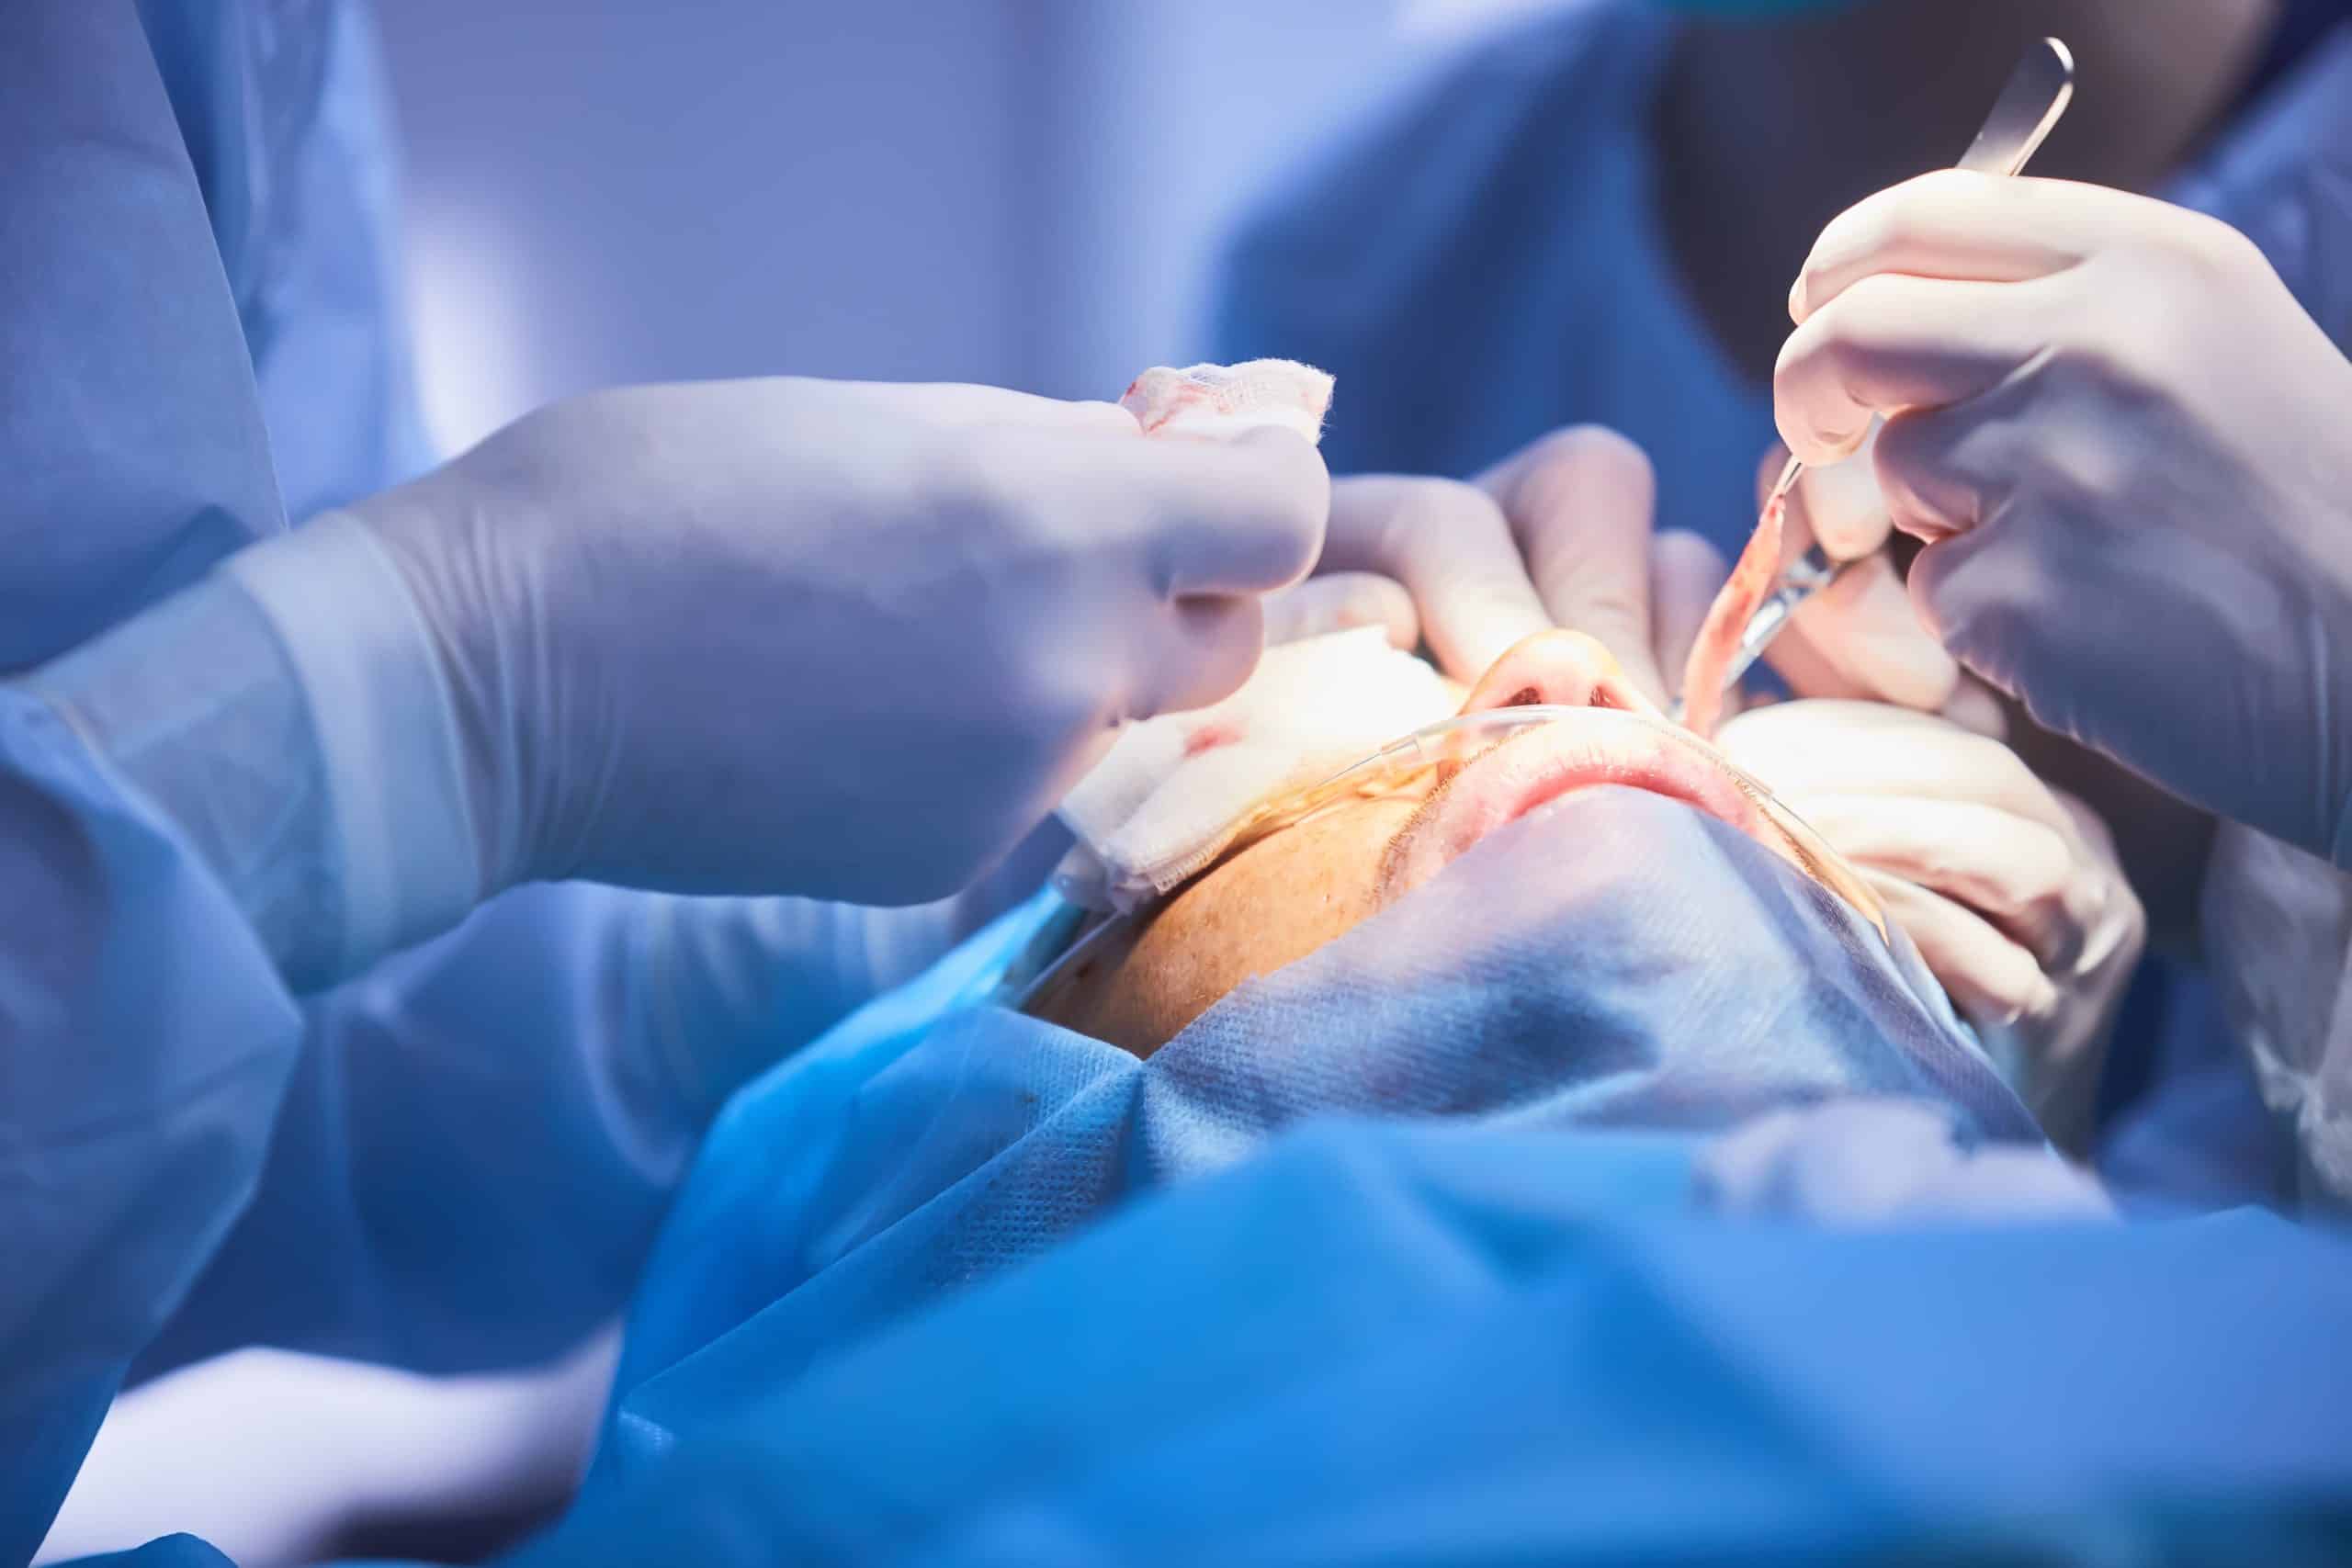 Tmj Replacement Surgery